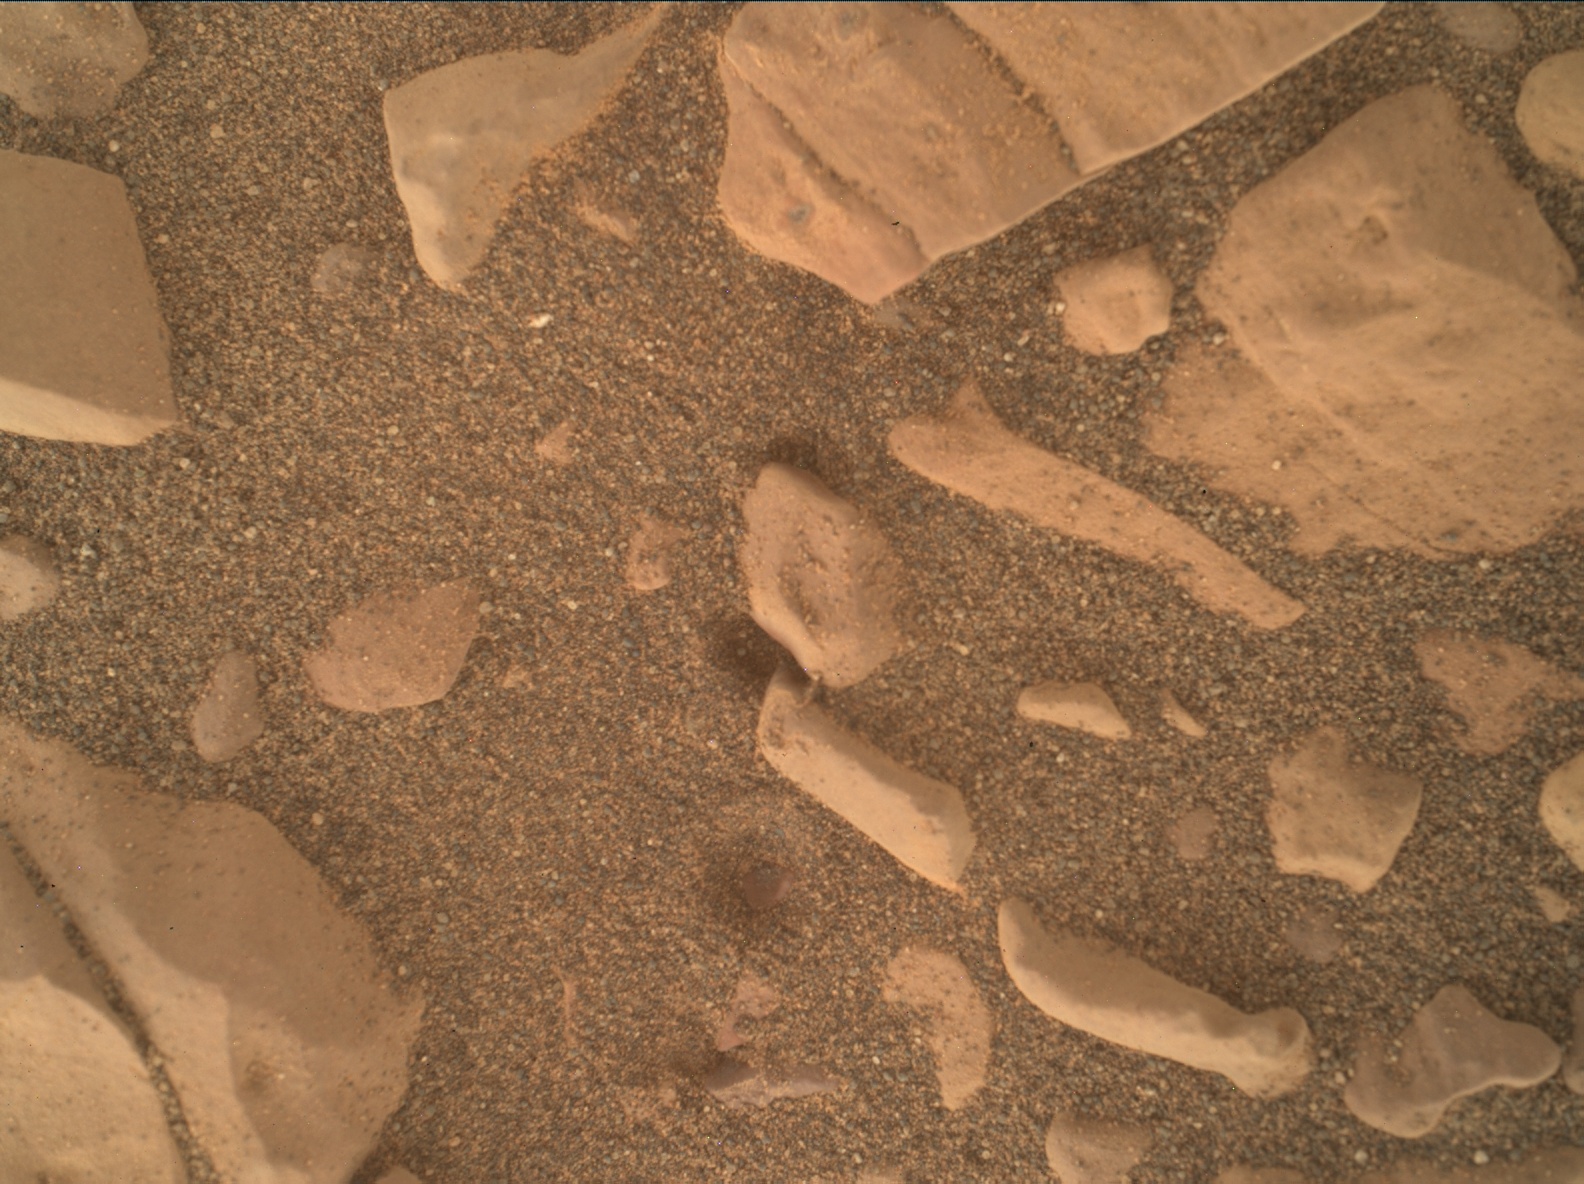 Nasa's Mars rover Curiosity acquired this image using its Mars Hand Lens Imager (MAHLI) on Sol 1850